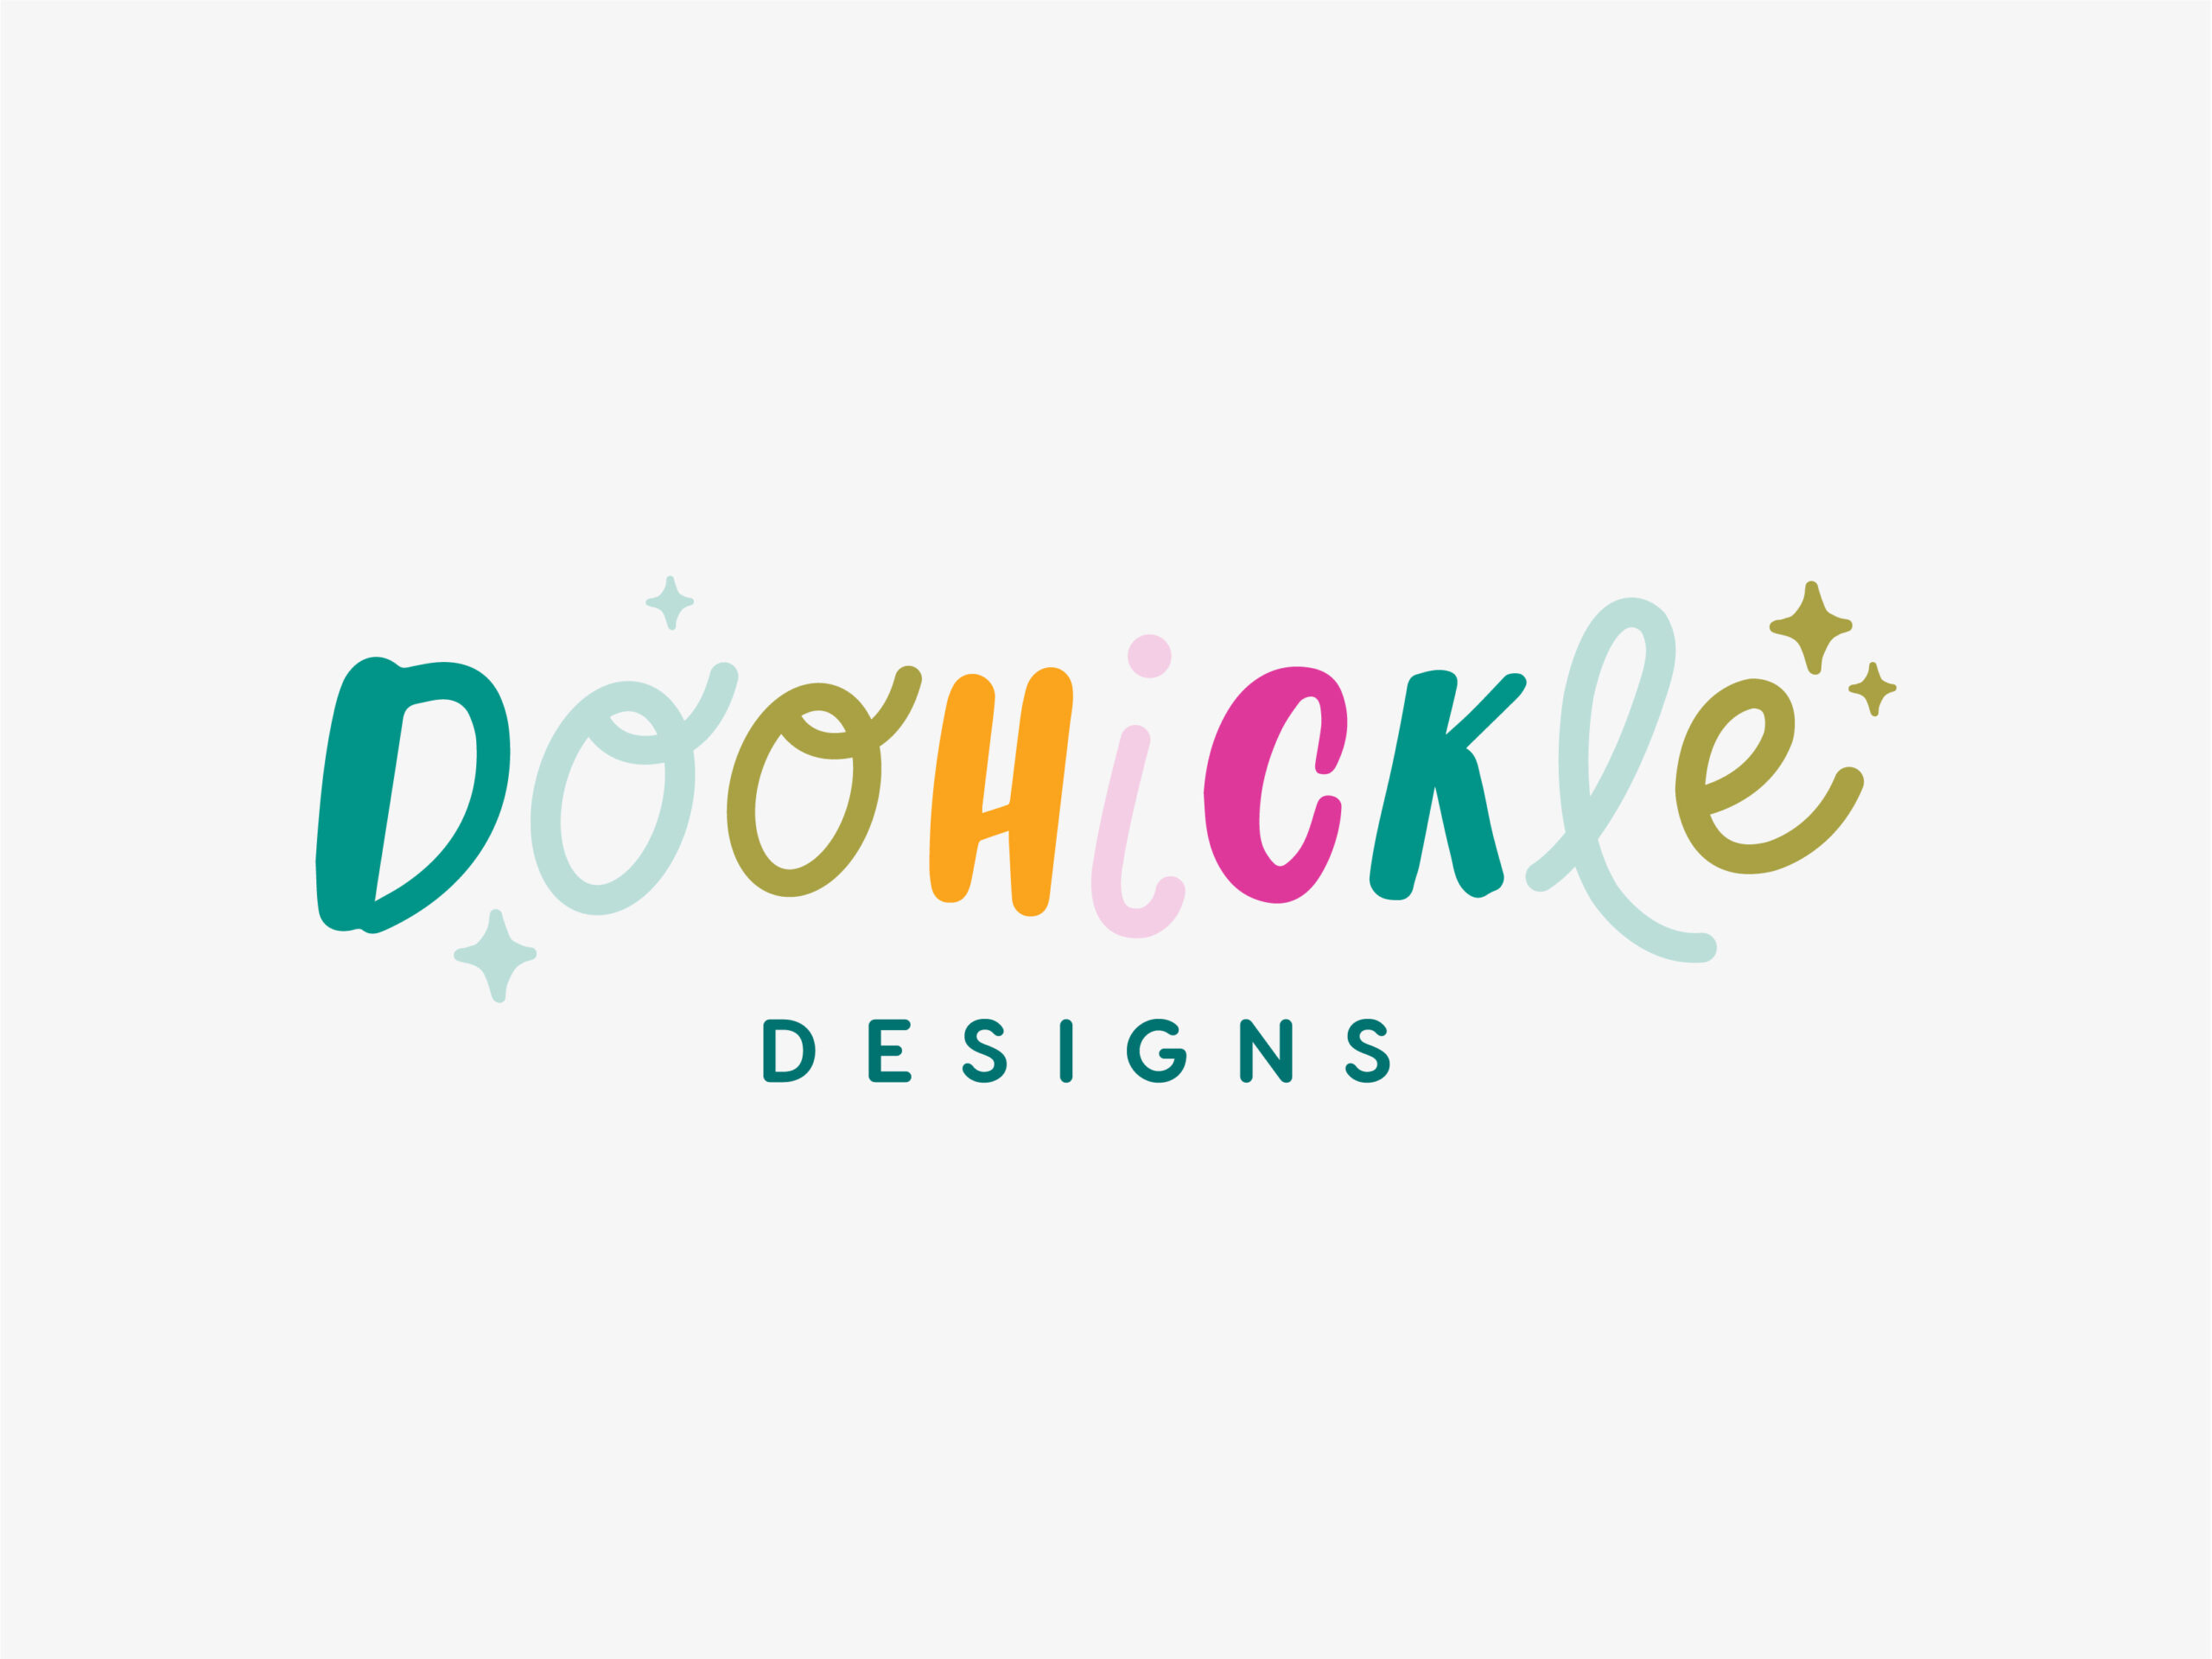 Extras_Small_Doohickle-Designs_new